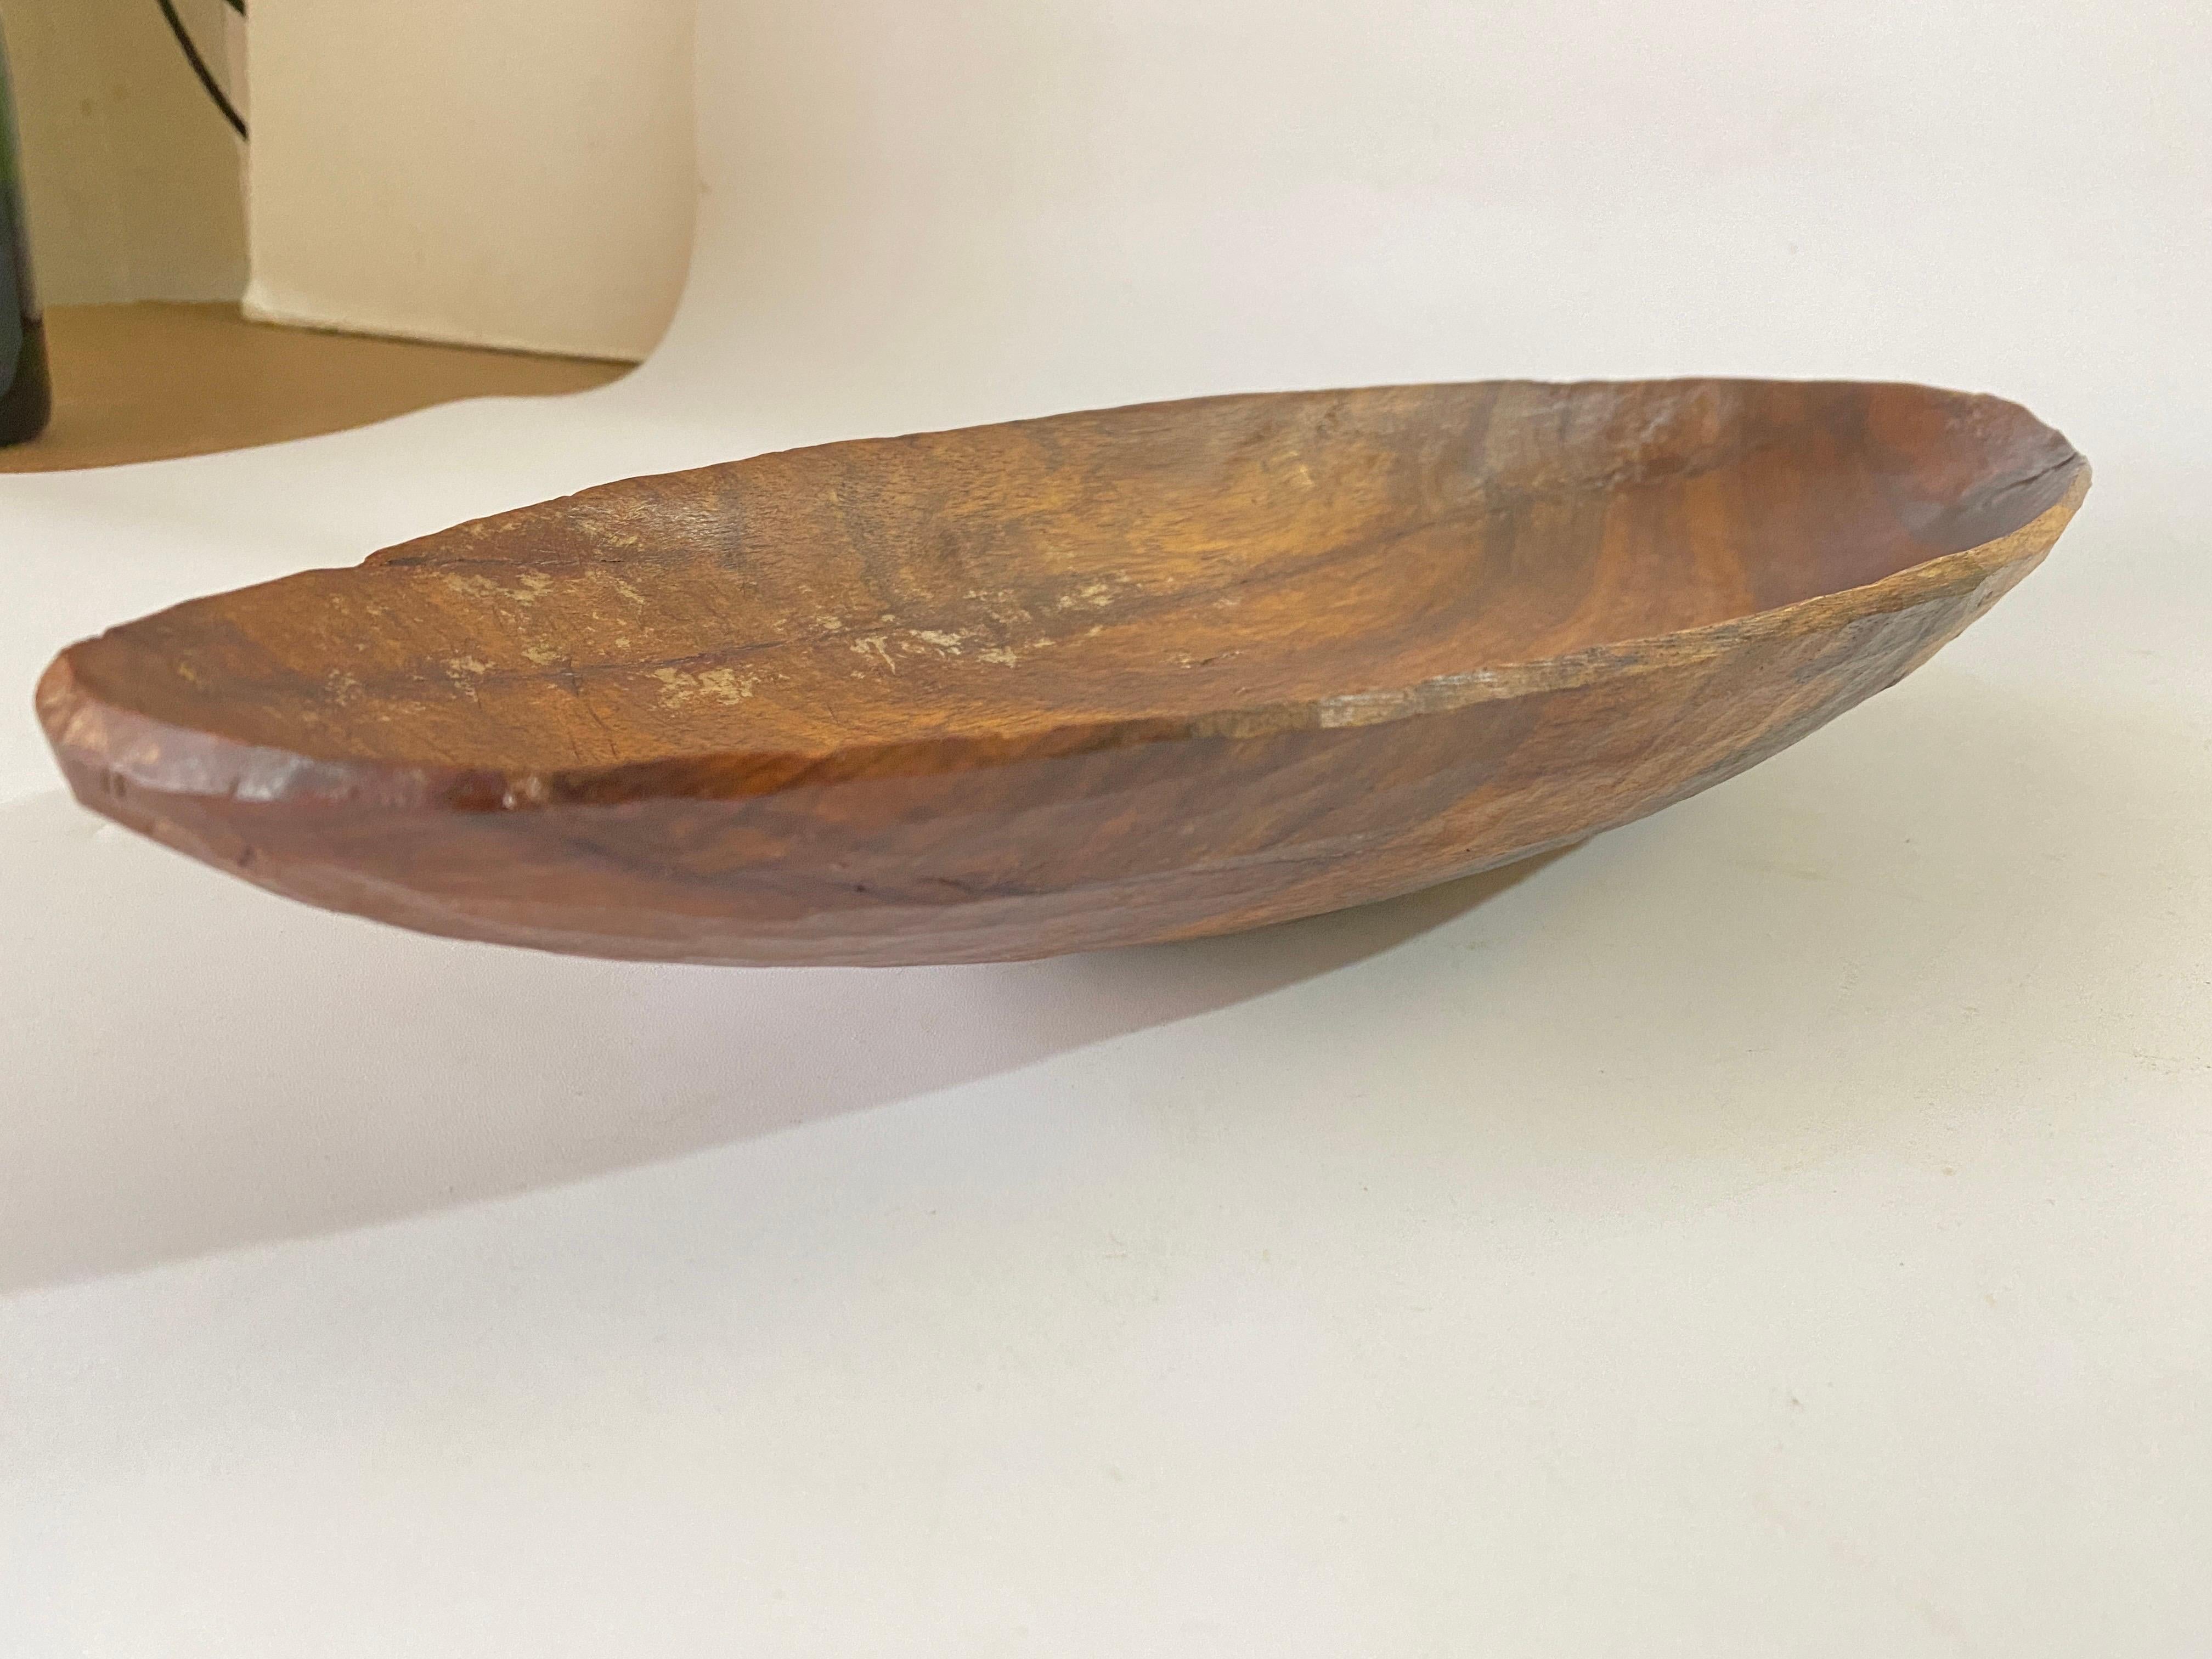 Patinated Brutalist Wood Bowl, Large, in a Brown Patina, France, circa 1960 For Sale